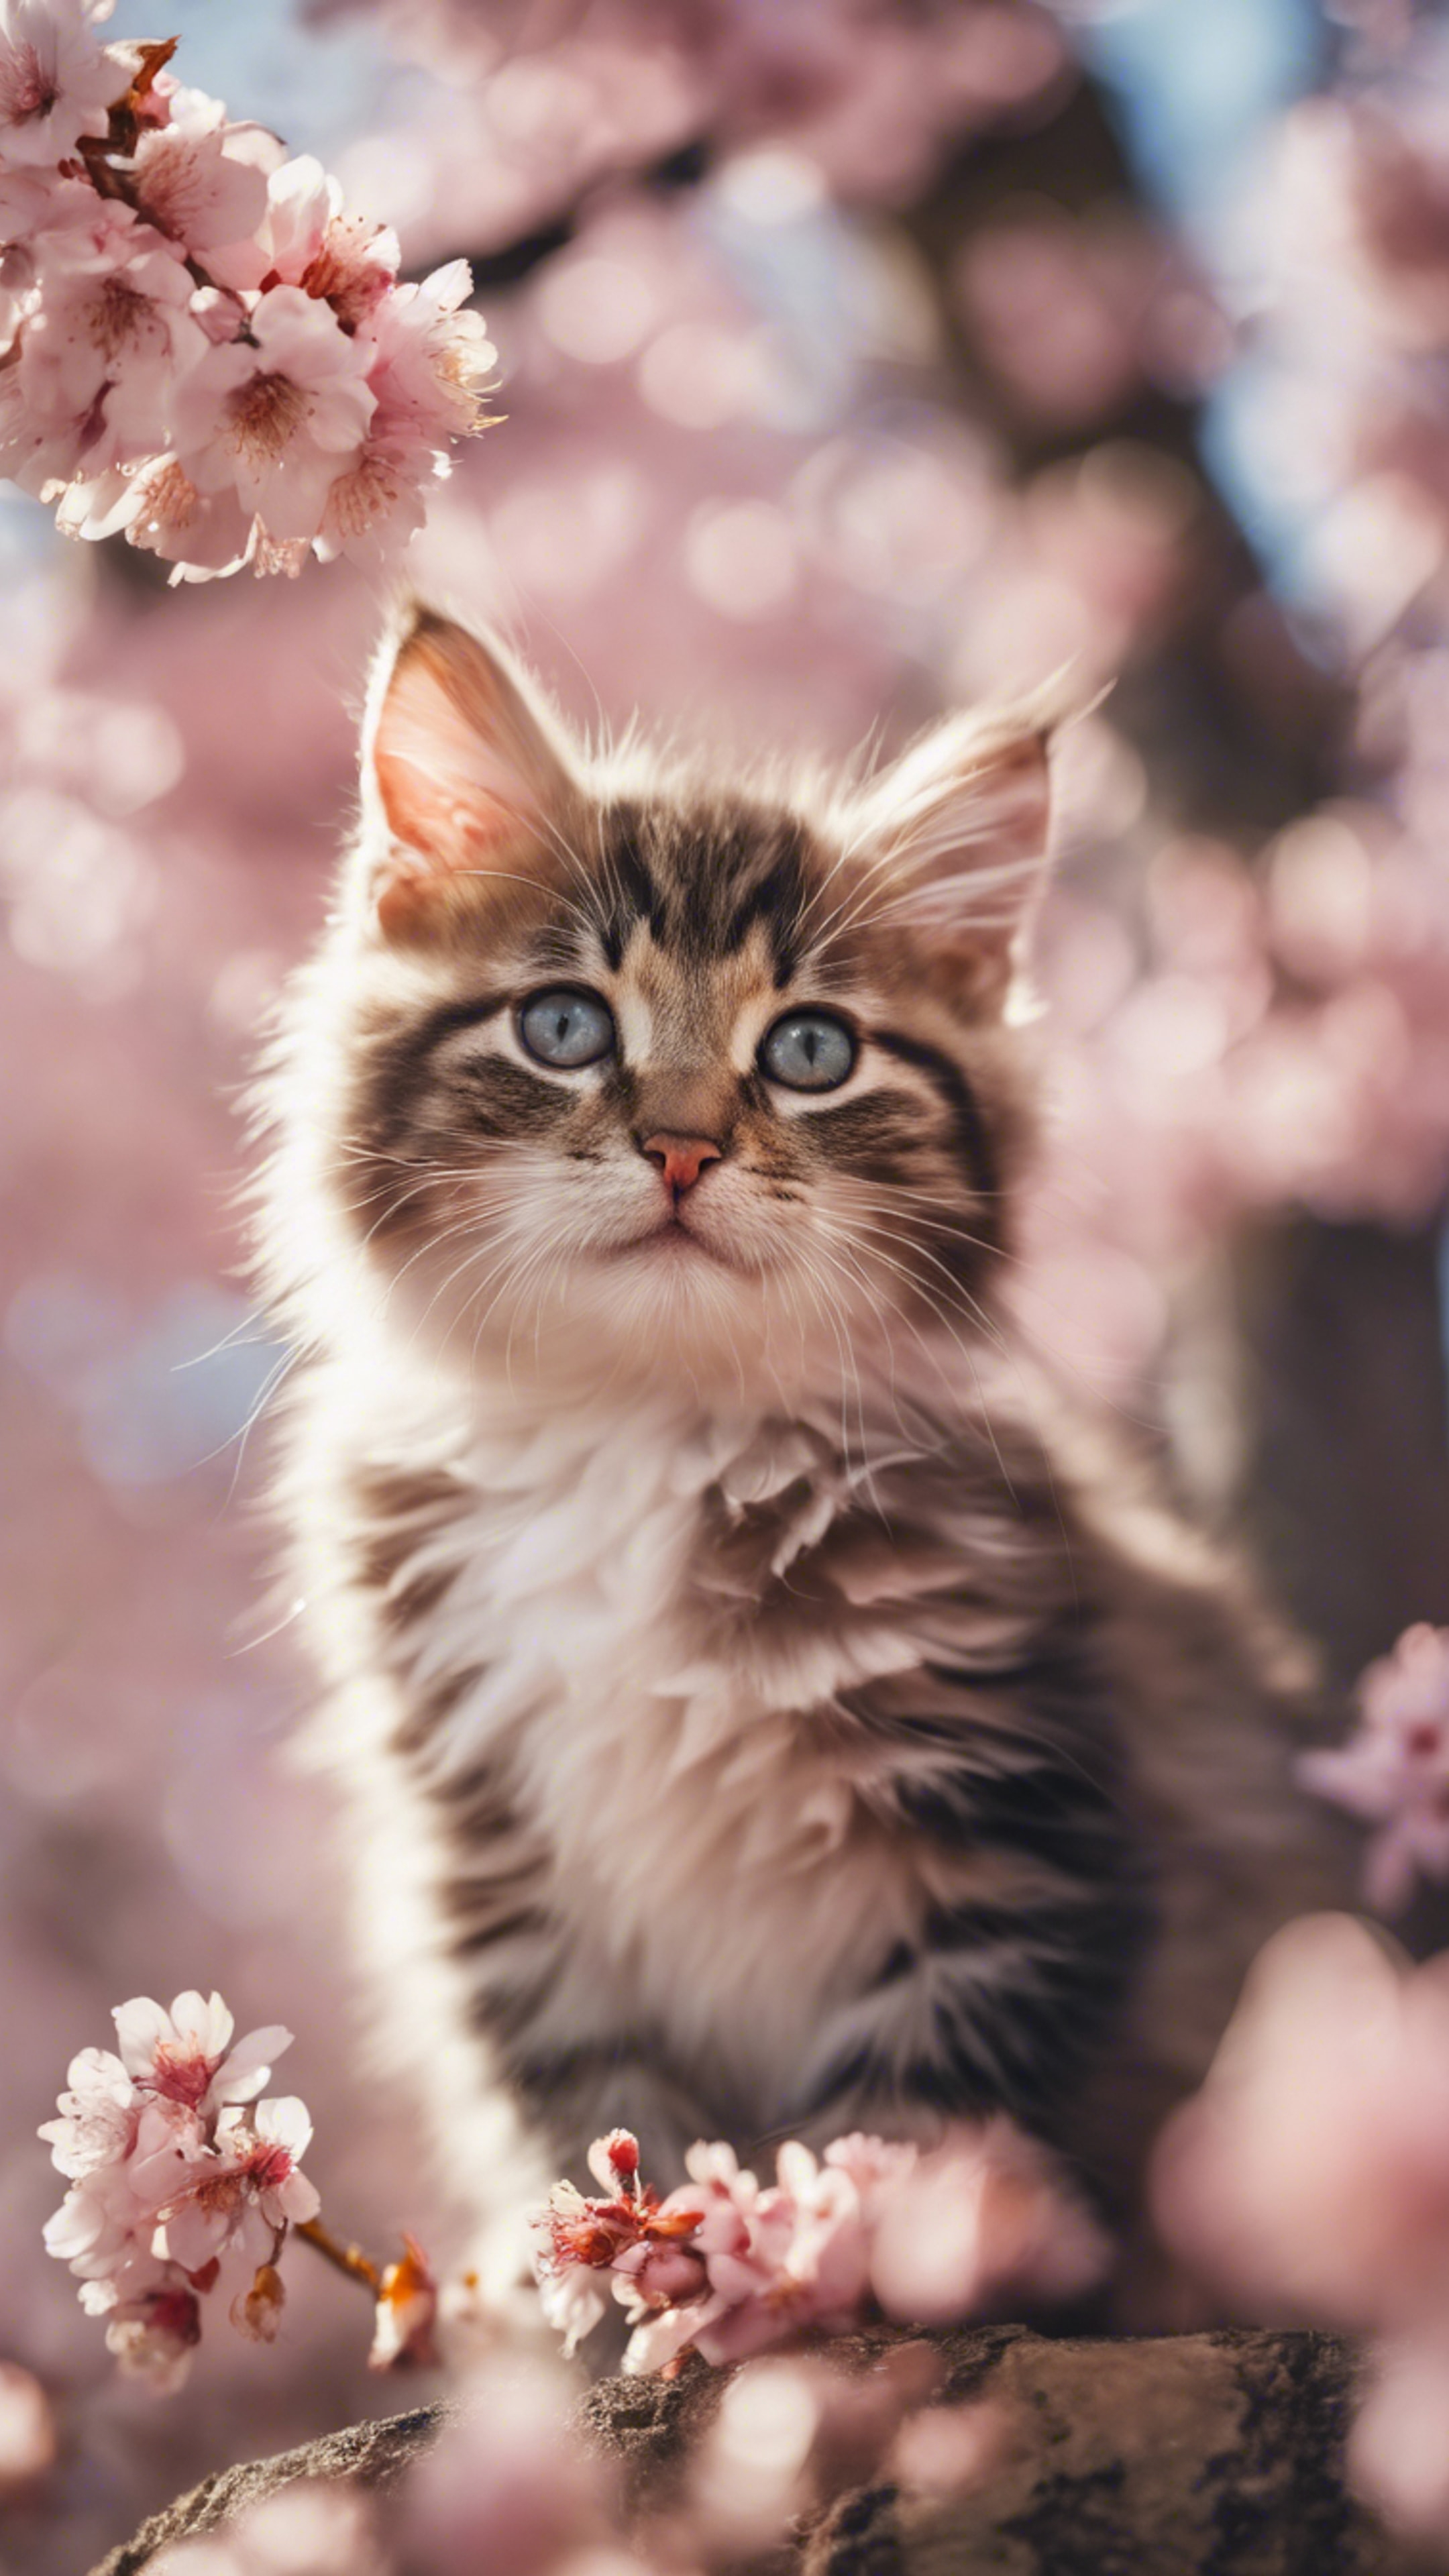 A cherry blossom tree in full bloom as the backdrop to a playful kitten in spring. Papel de parede[56e1c1b9132e46d98bd1]